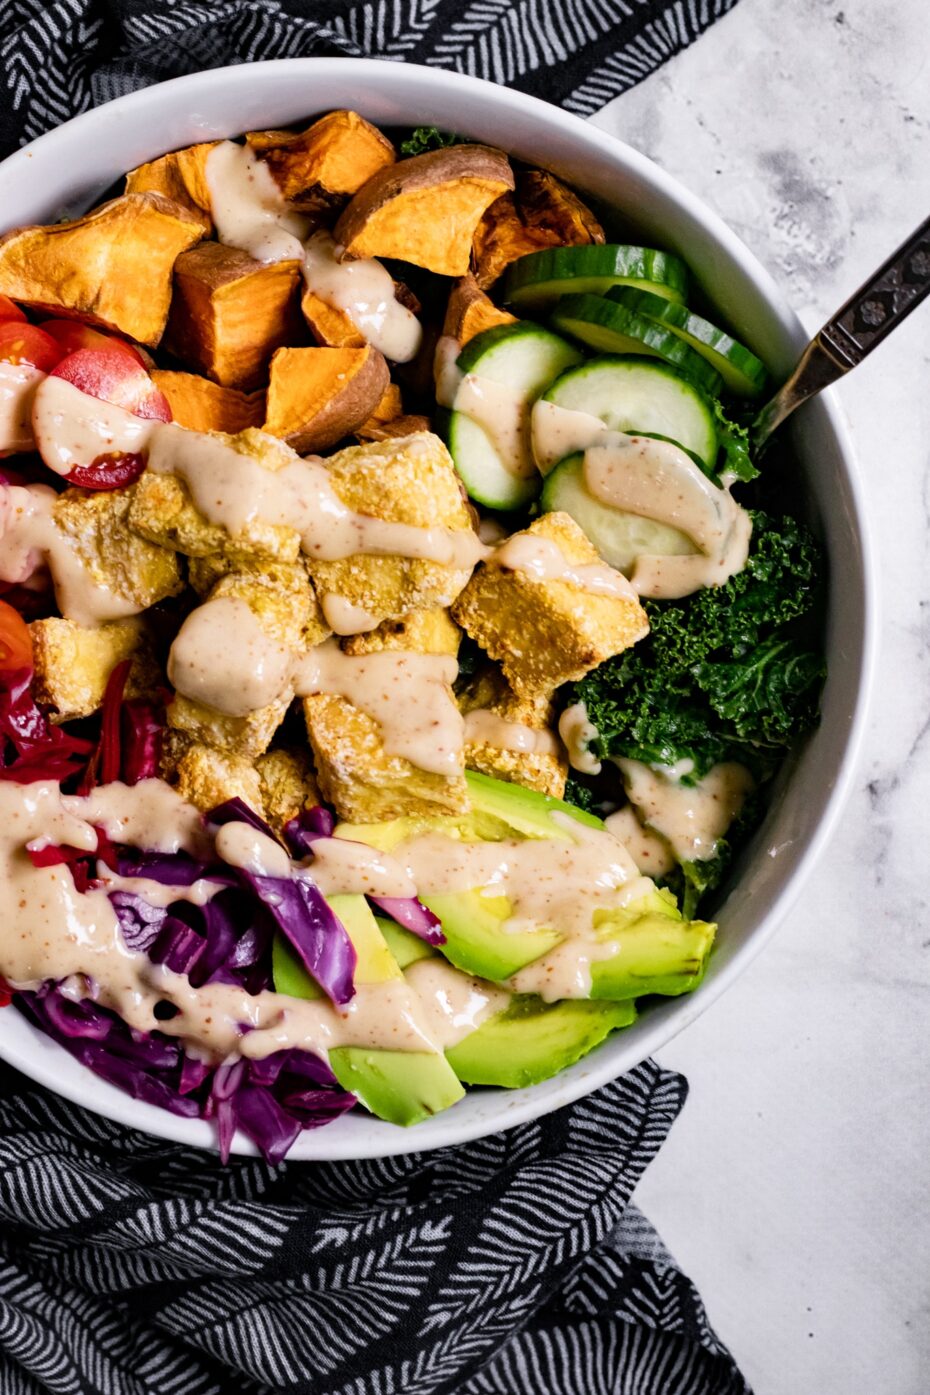 White bowl from above with avocado slices, cucumber, purple cabbage, tofu cubes and diced sweet potato  drizzled with a light brown dressing